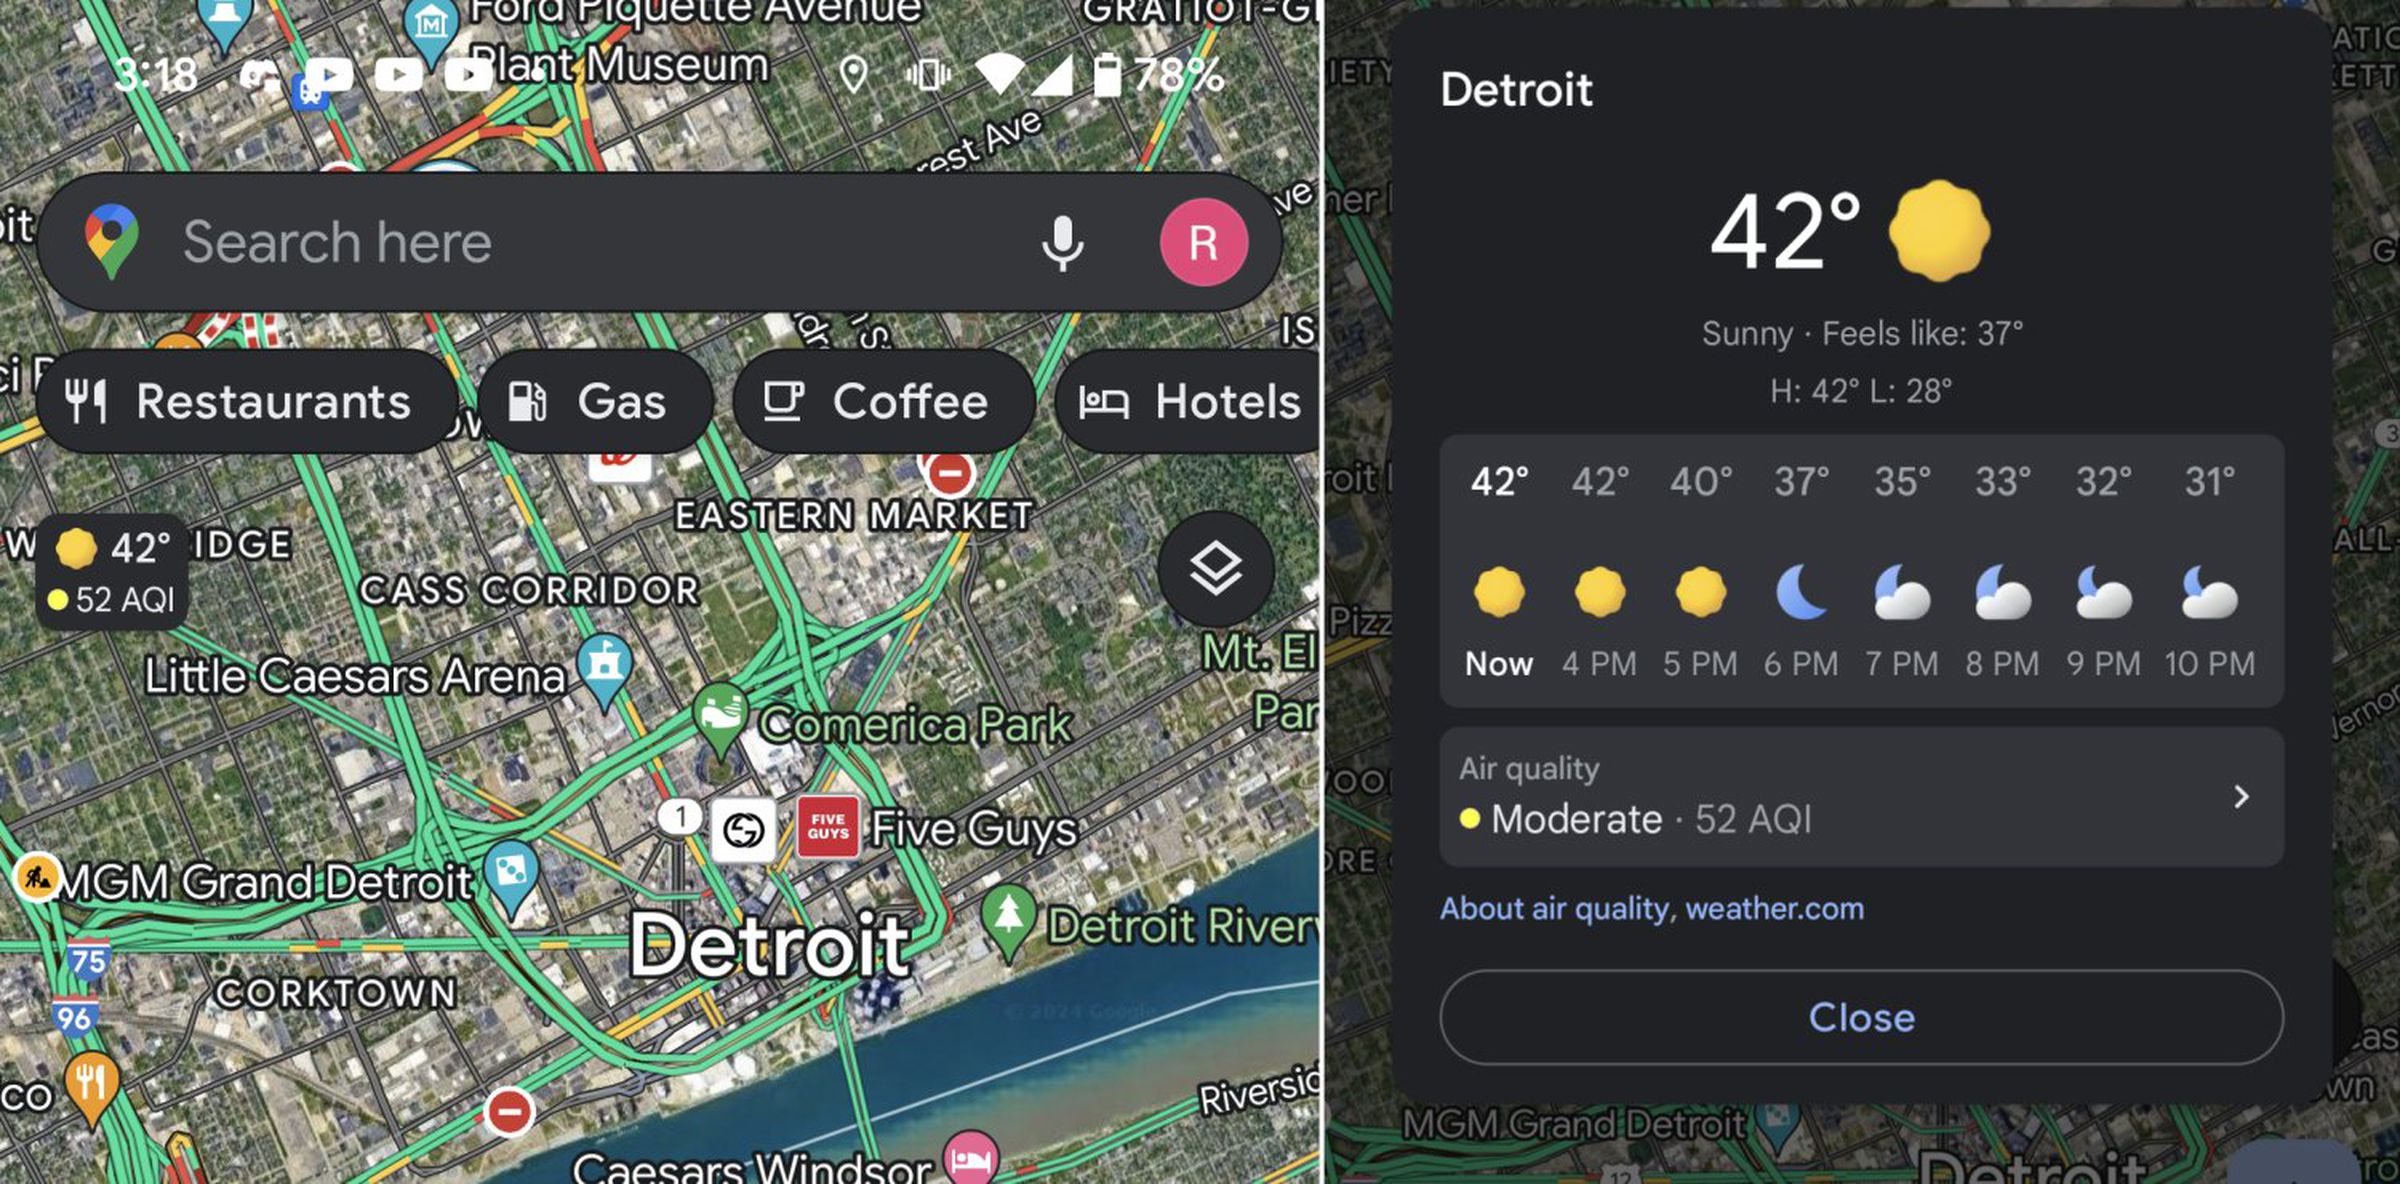 Screenshots of Google Maps on Android, showing a new icon for the current weather over the city of Detroit, and a second image with it expanded and opened, showing the forecast over the next few hours along with the current air quality.